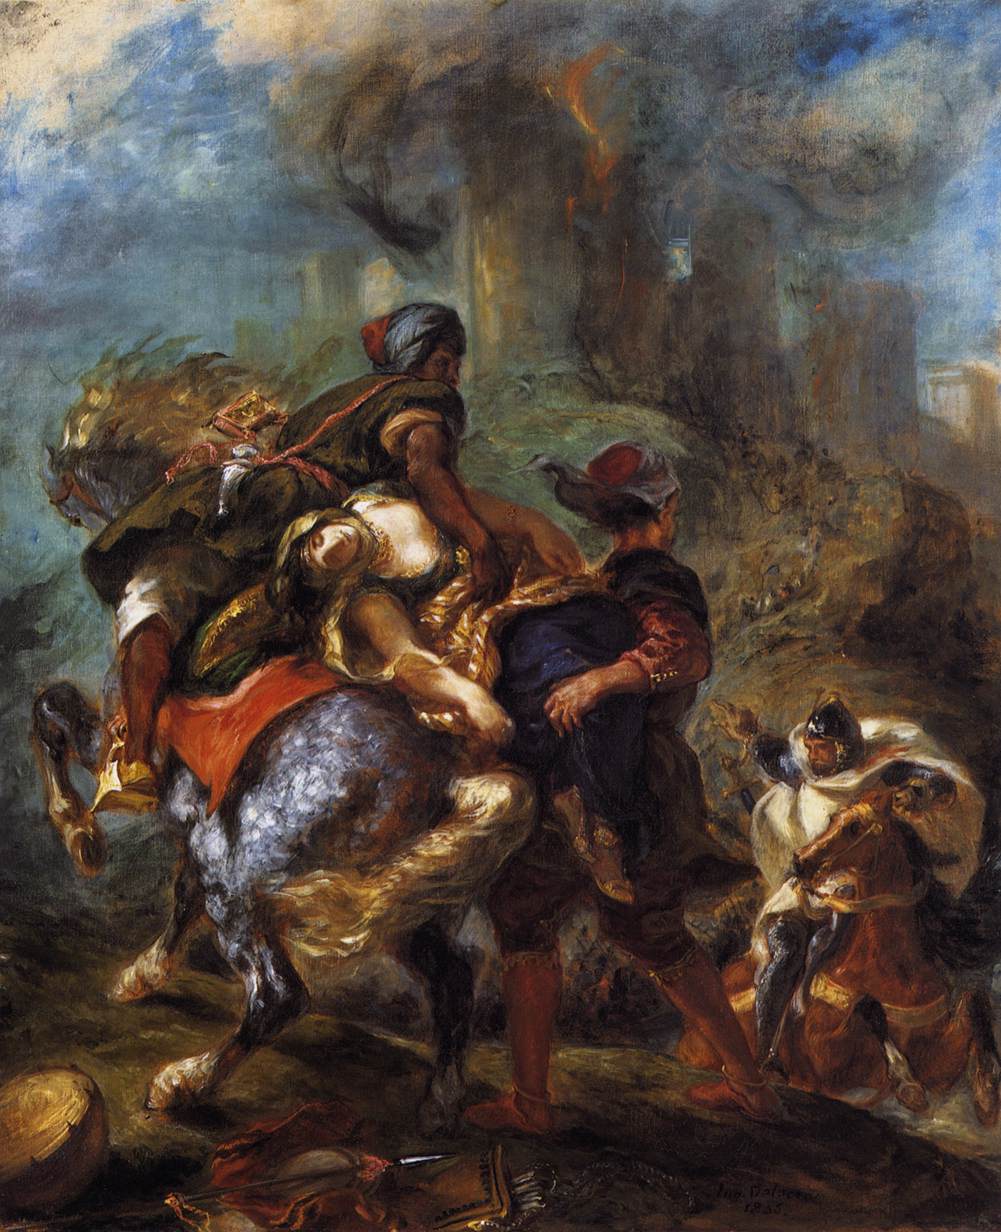 The Abduction of Rebecca by Eugène Delacroix Reproduction Painting by Blue Surf Art